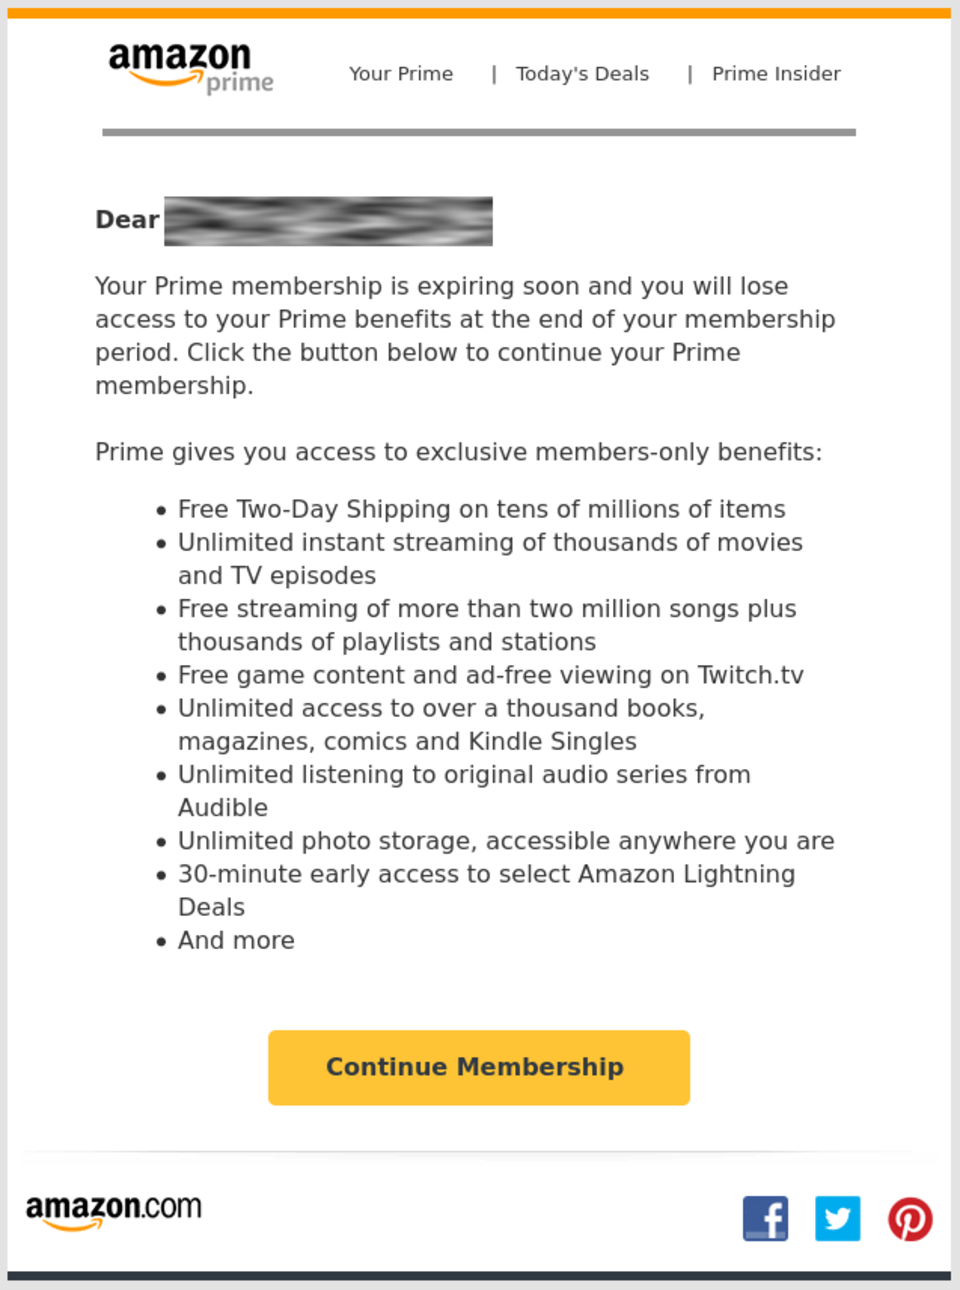 Screenshot of an email listing the benefits to be lost when a Prime Membership expires